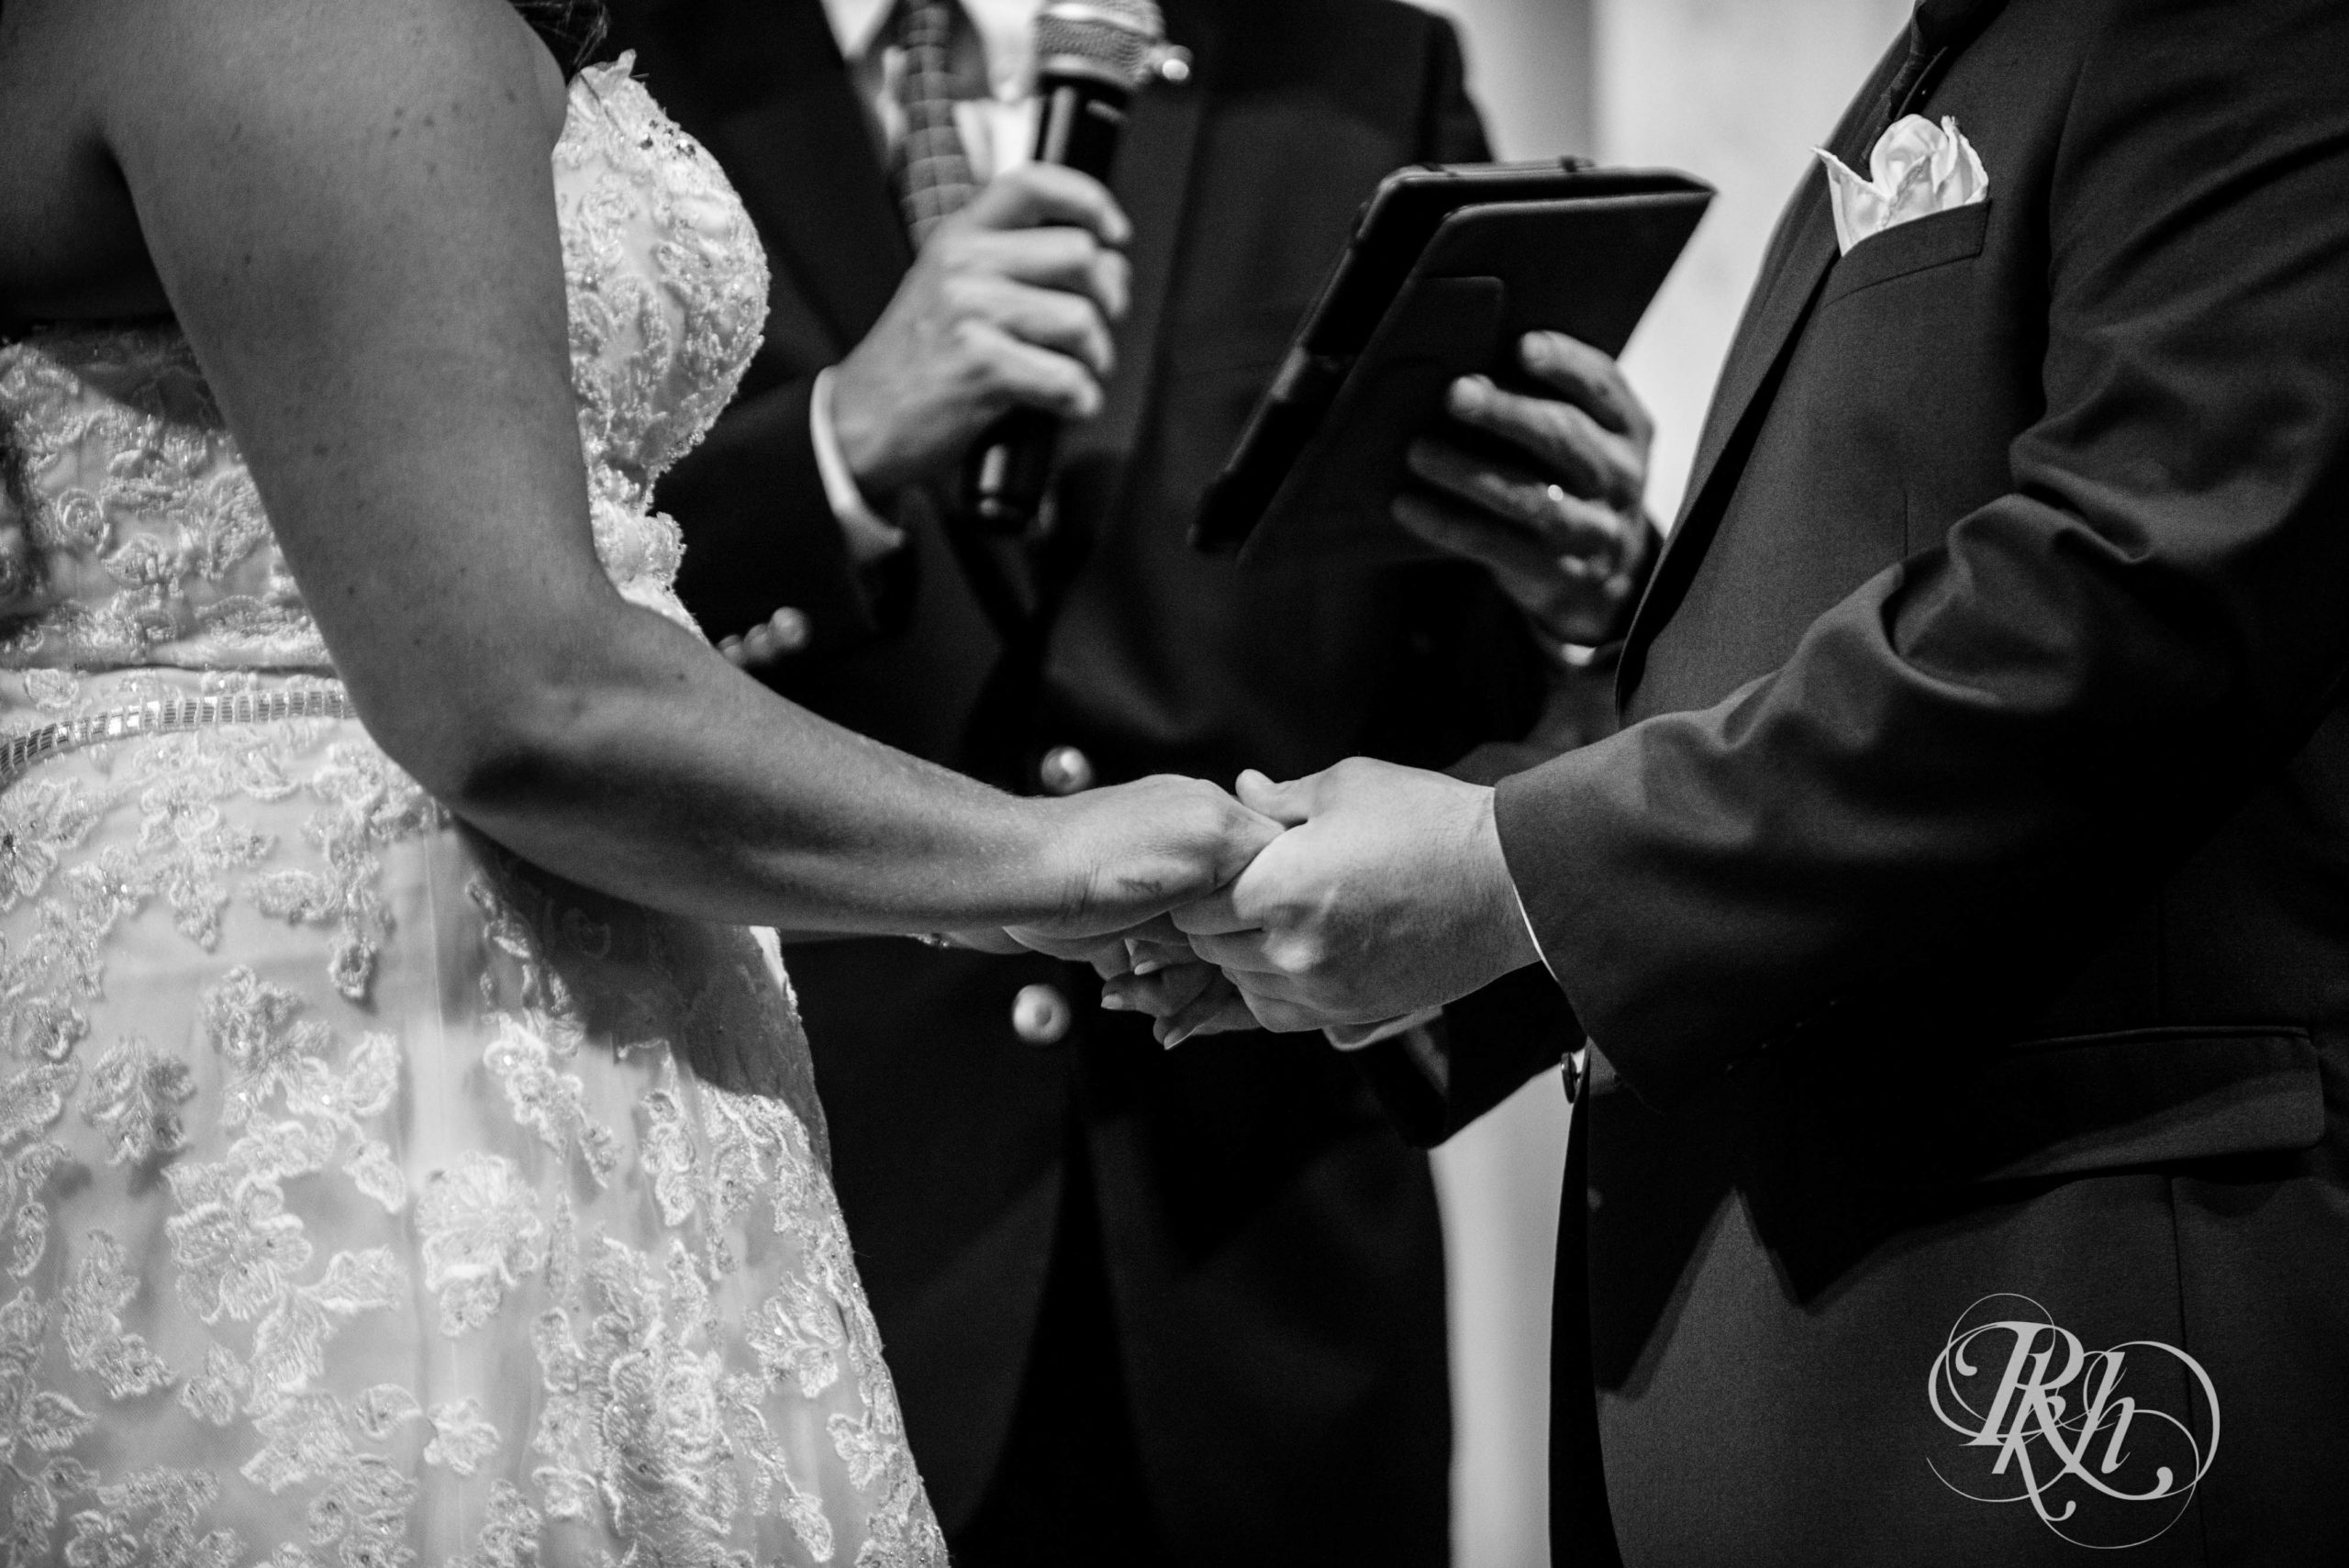 Bride and groom hold hands during wedding ceremony at Landmark Center in Saint Paul, Minnesota.